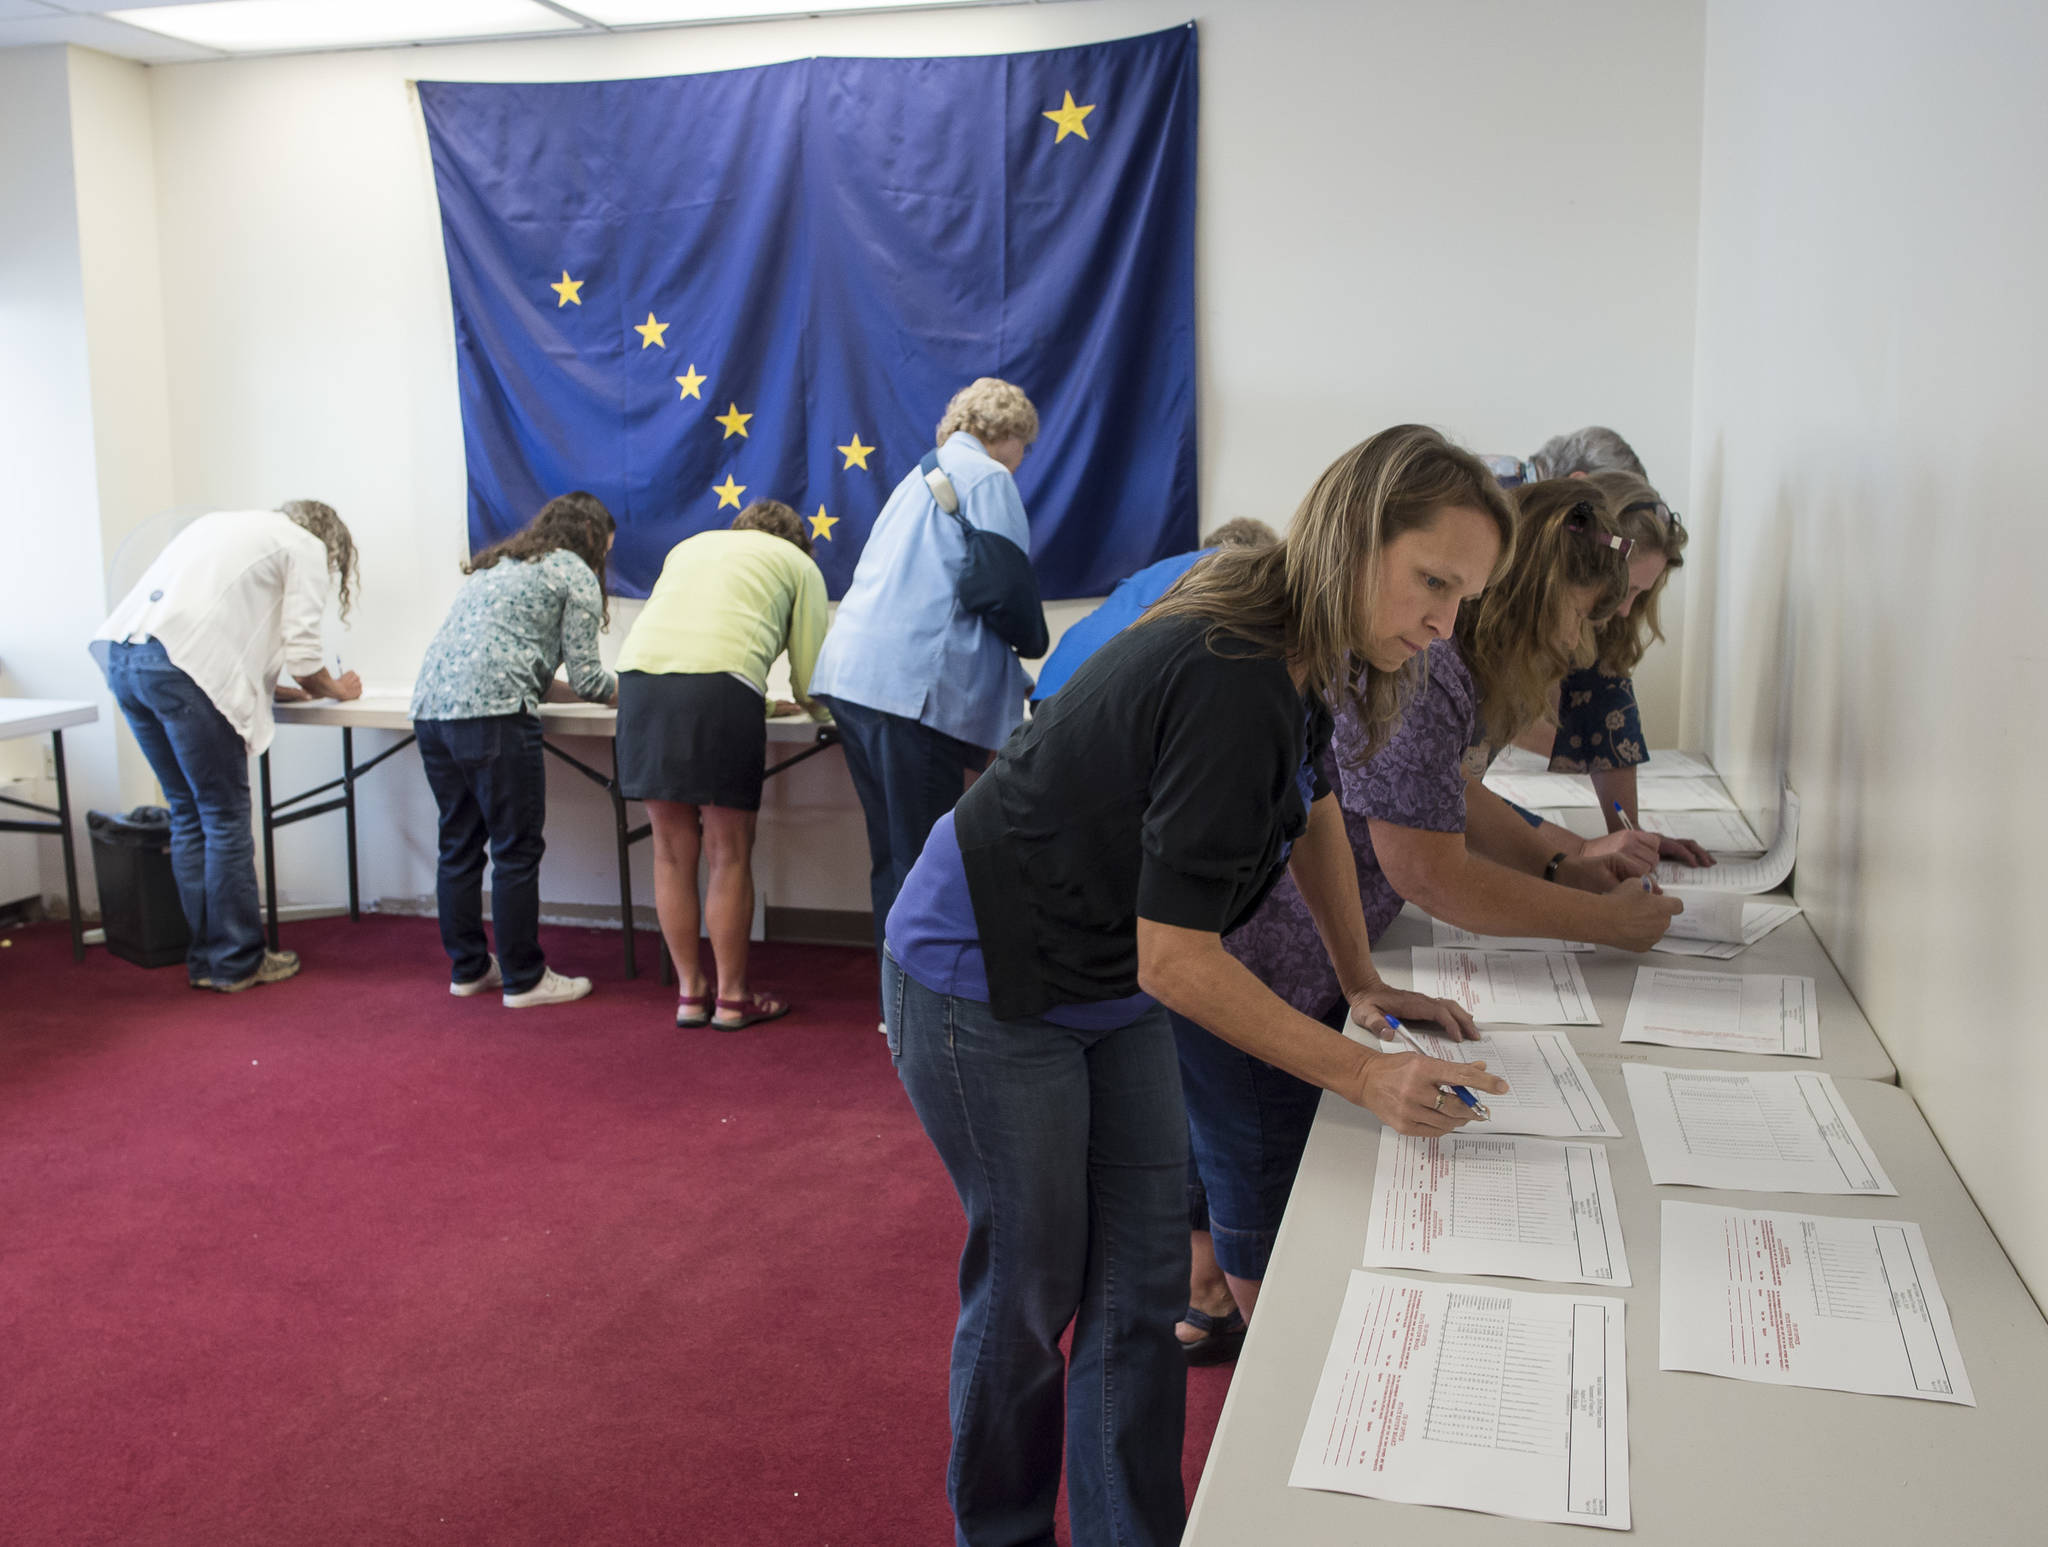 Alaska Review Board members sign the certifications of the state’s primany election at the state’s election office in downtown Juneau on Tuesday, Sept. 4, 2018. (Michael Penn | Juneau Empire)